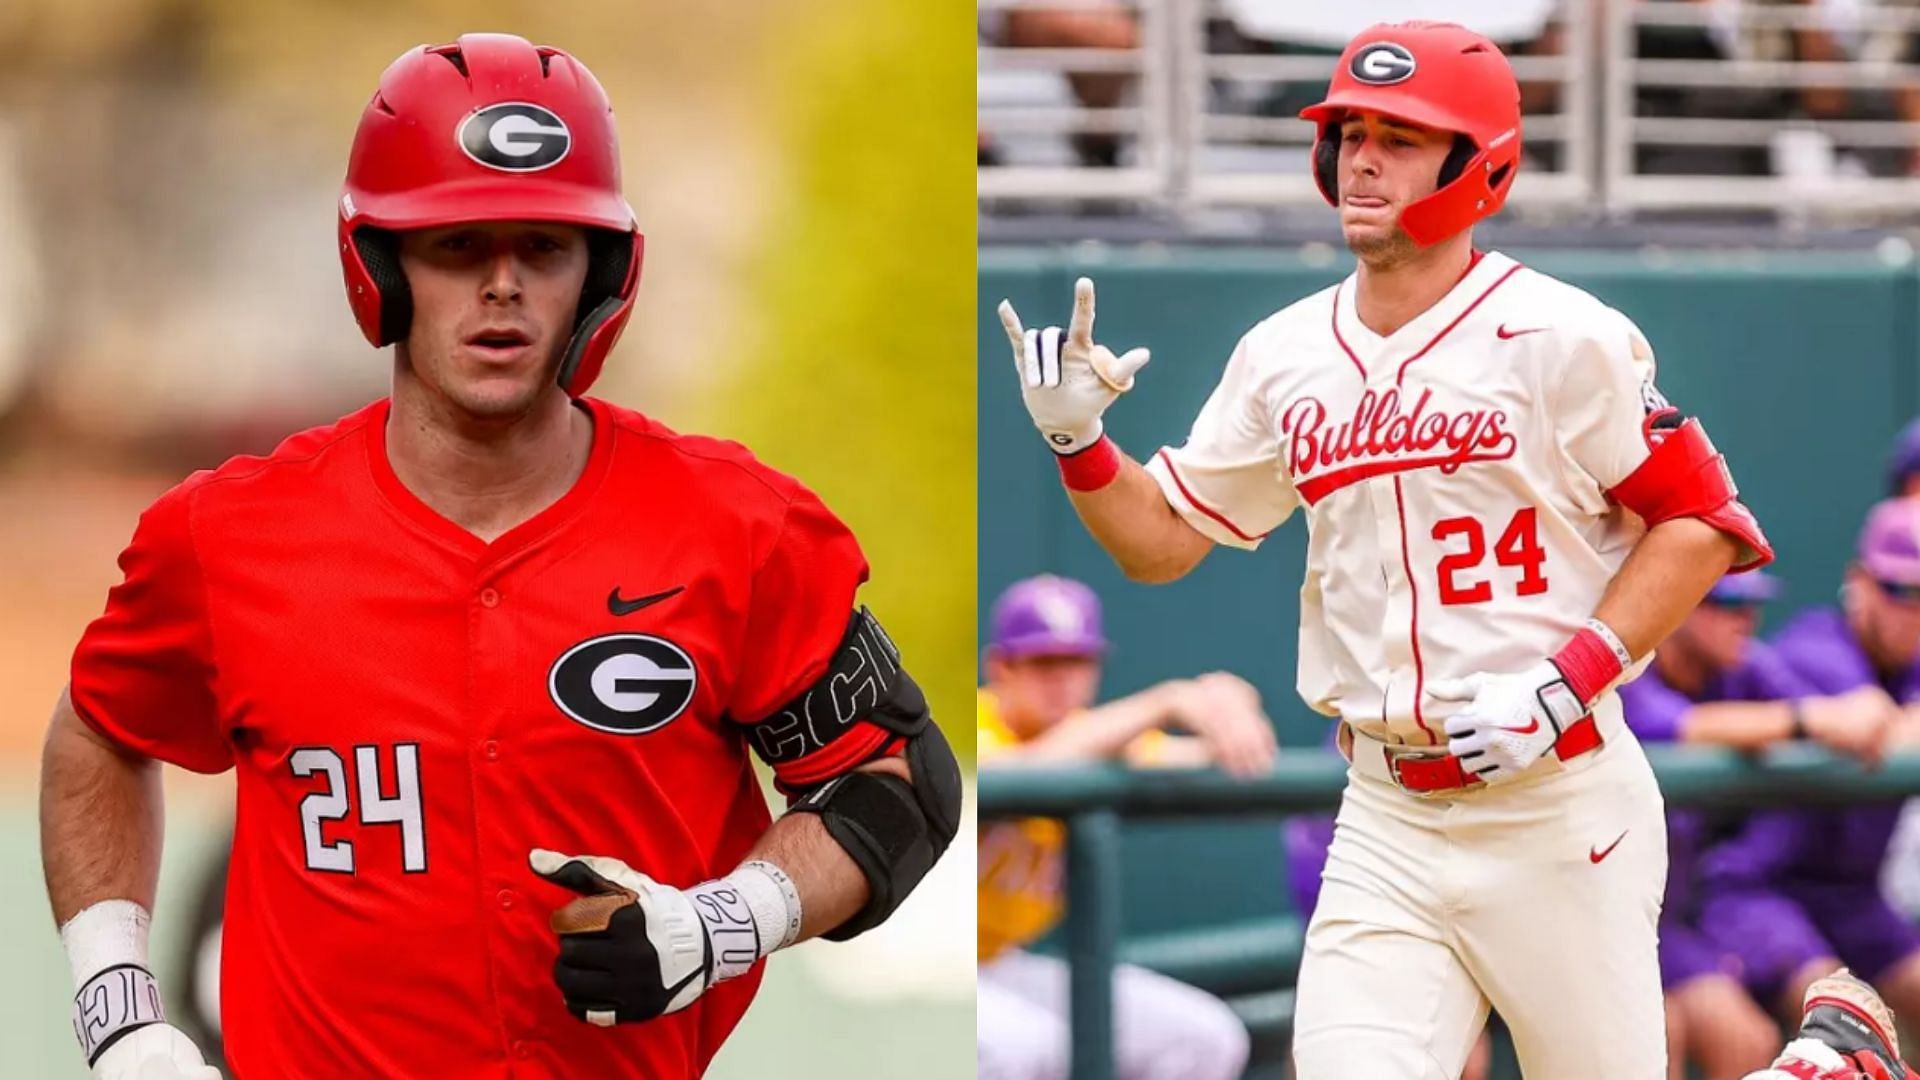 Charlie Condon has jacked up 33 home runs in 47 games this season for Georgia.